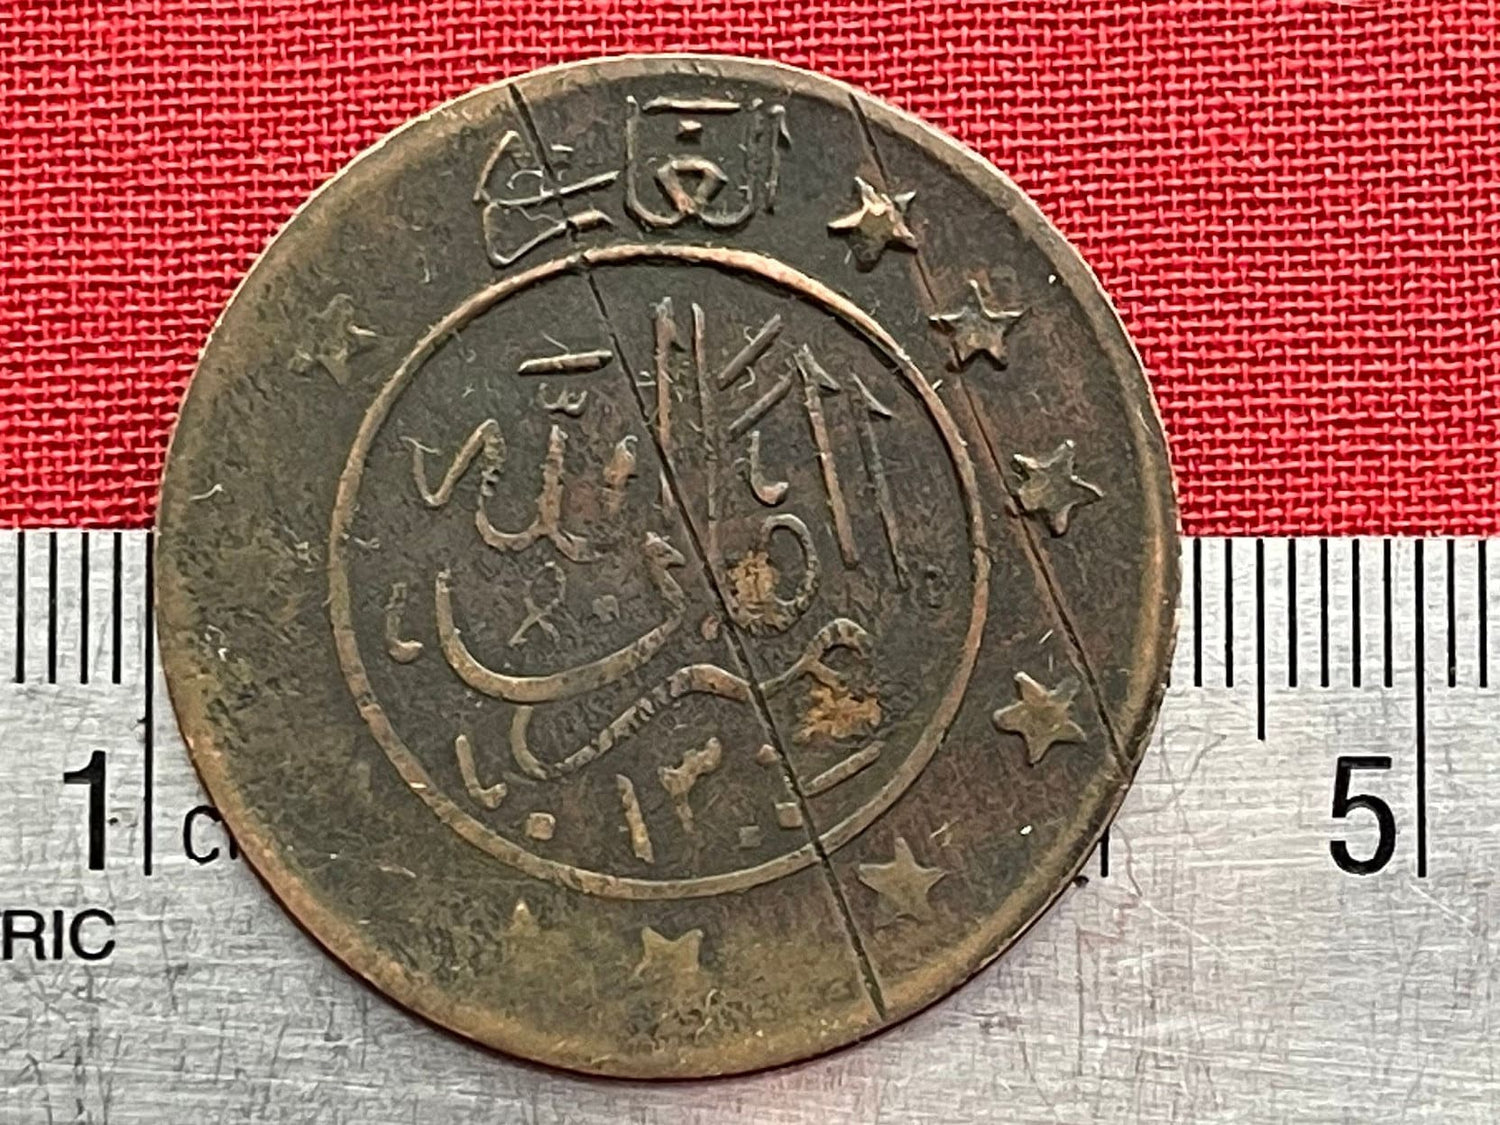 Afghan Mosque with Stars 1919 Great Game Ghazi Amanullah Khan 3 Shahi Afghanistan Authentic Coin Money for Jewelry (CONDITION: Fair)